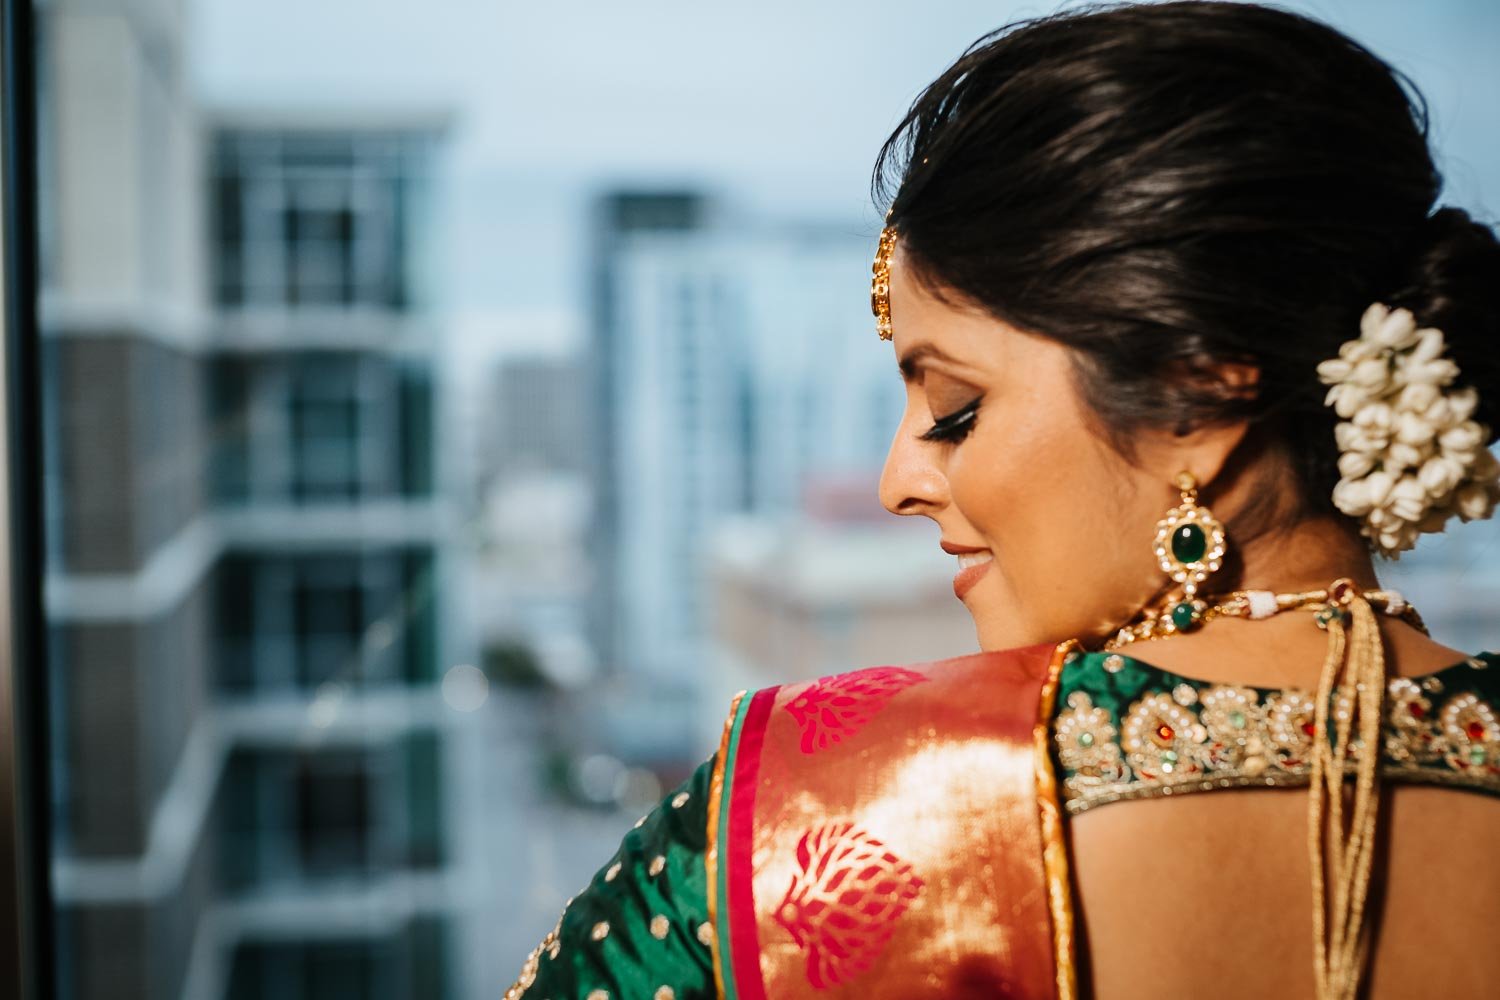 Indian bride looks to her left with the Austin skyline in background